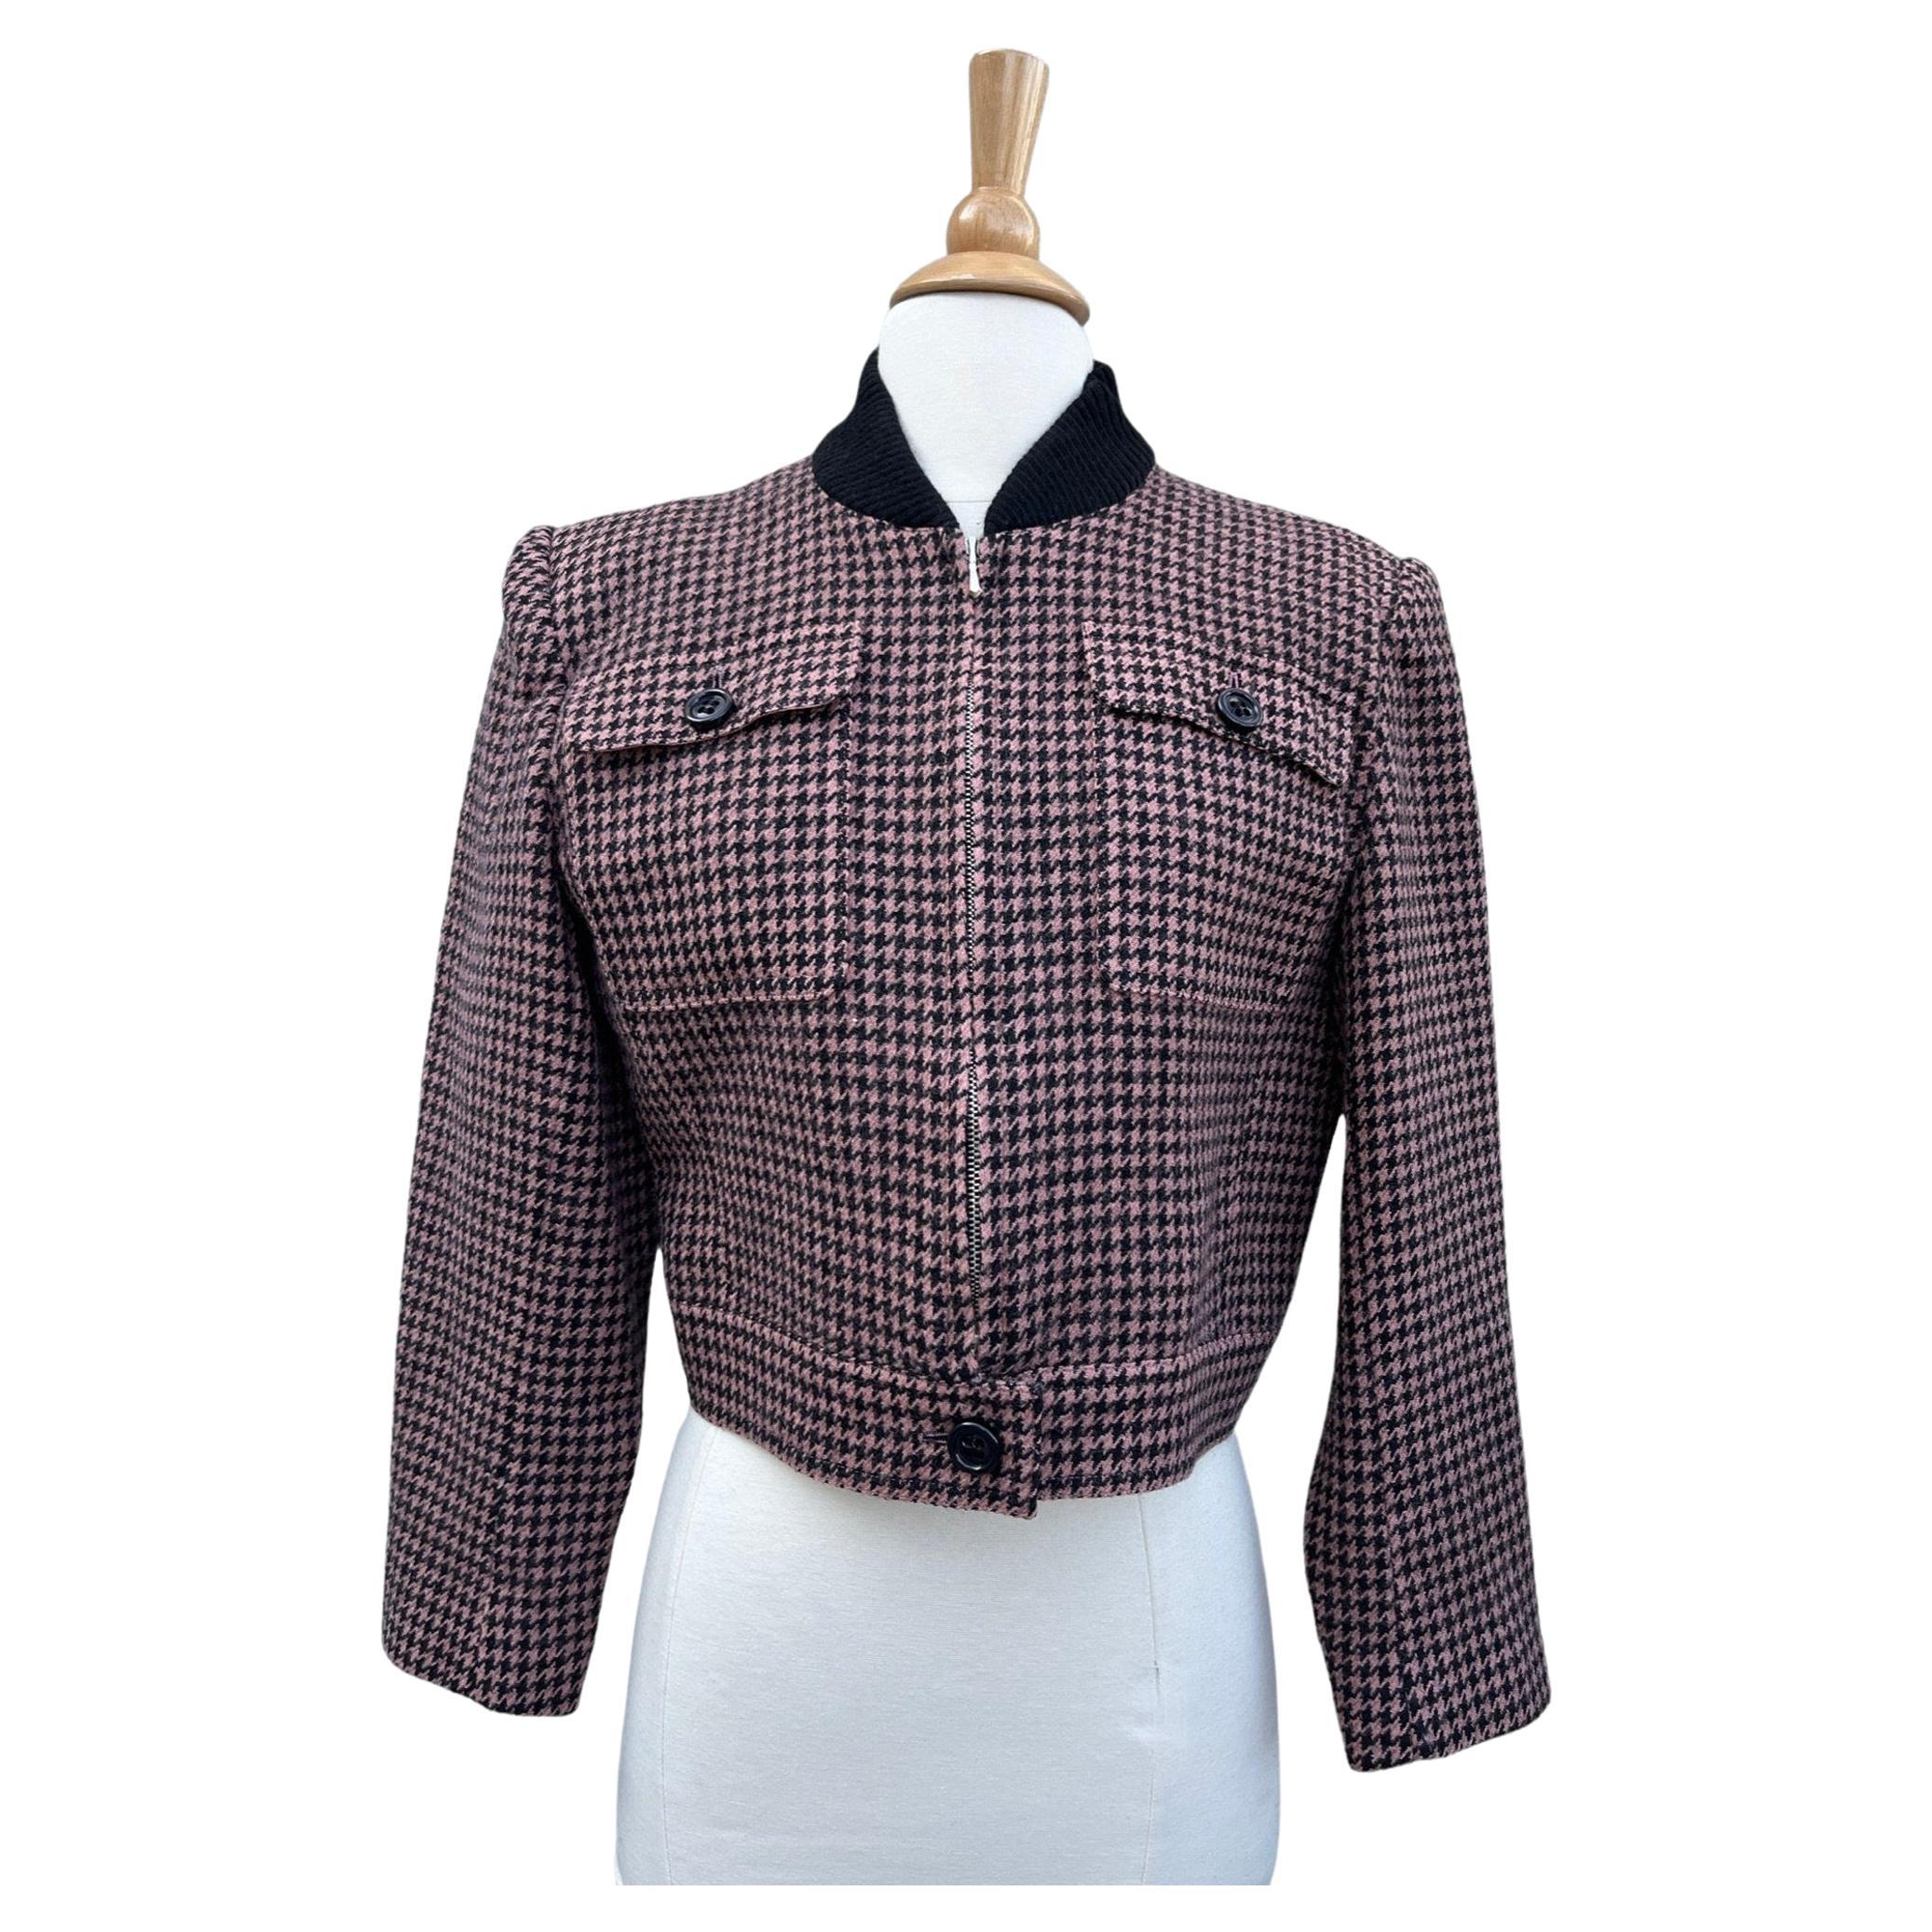 Guy Laroche Houndstooth Jacket, Circa 1980s For Sale